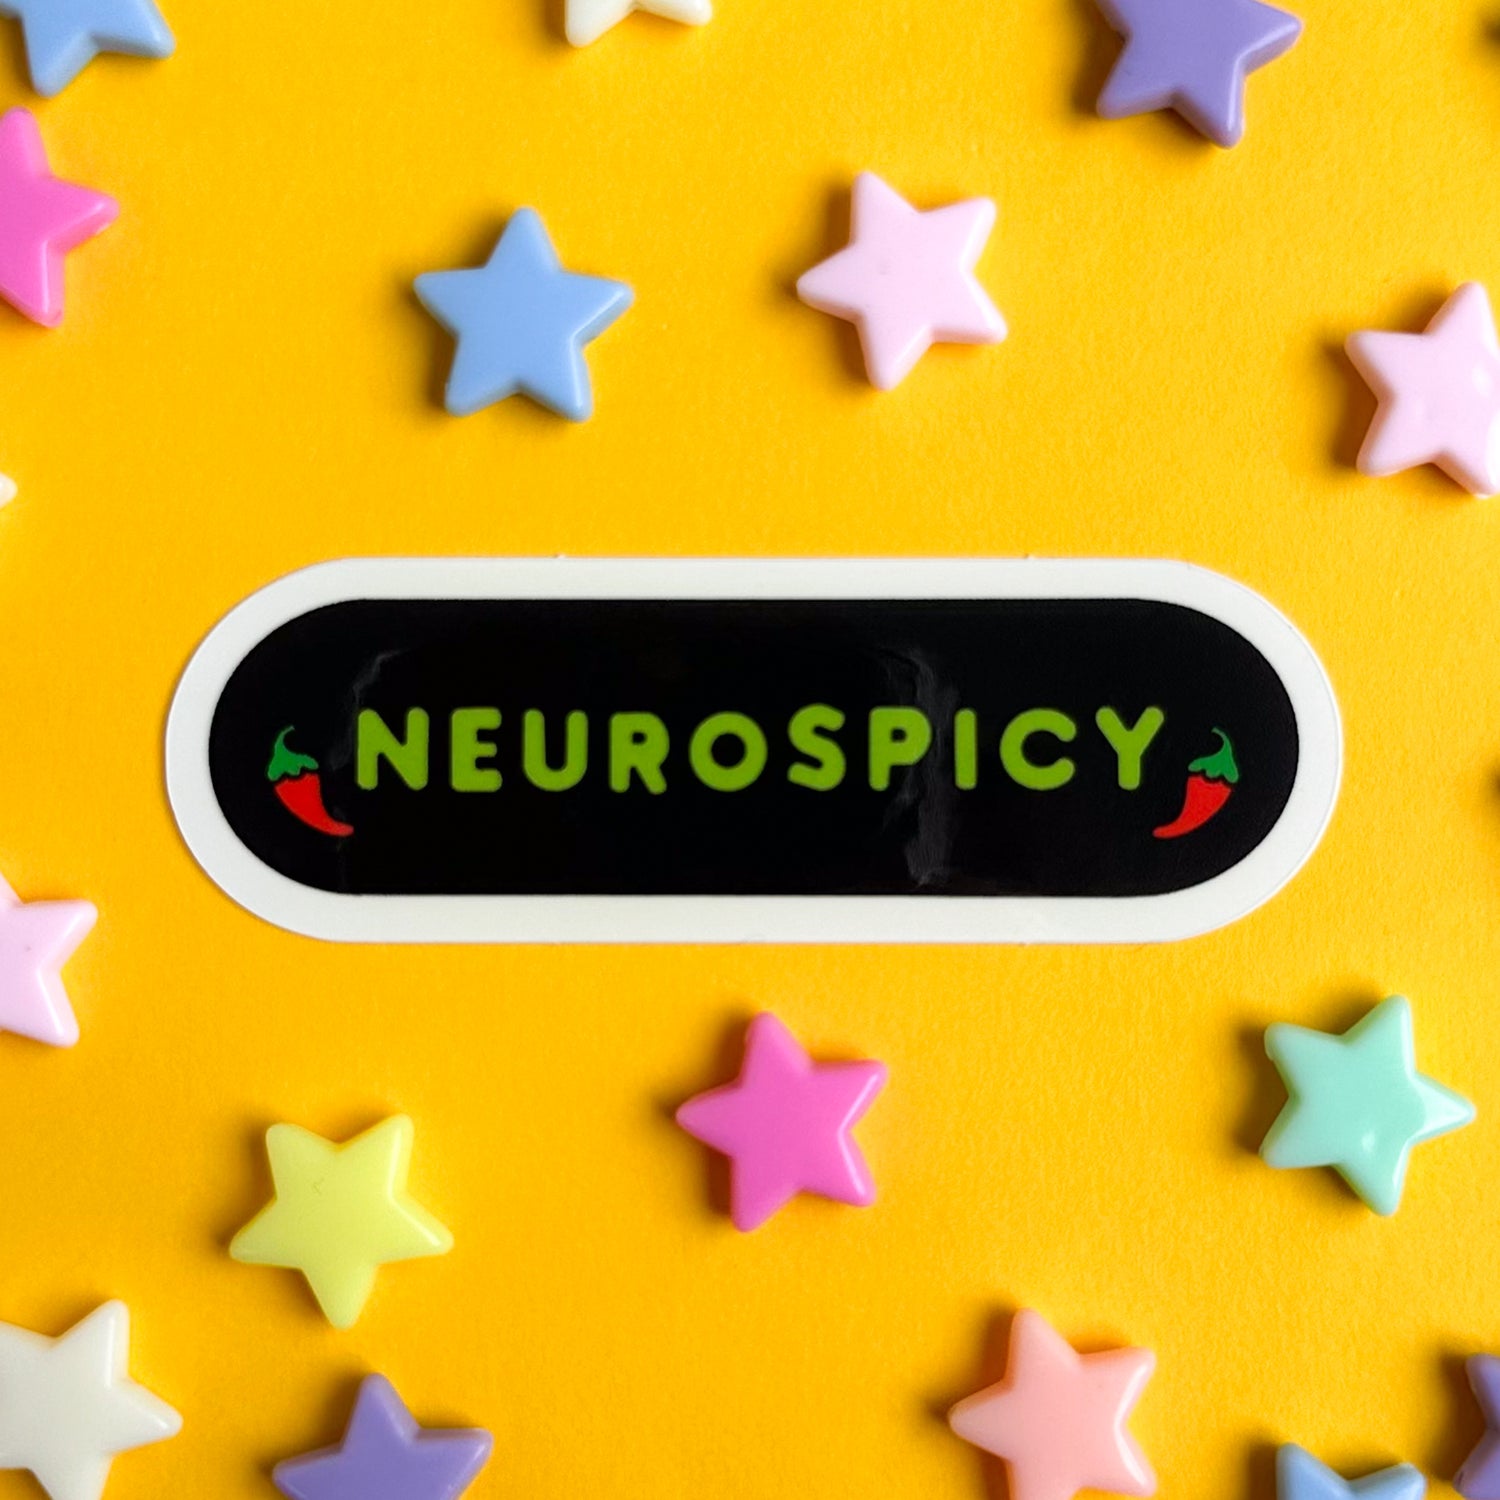 The word neurospicy on an oval shaped sticker, the letters are lime green on a black background framed by chili peppers. The sticker is on a yellow piece of paper with star beads around it. 